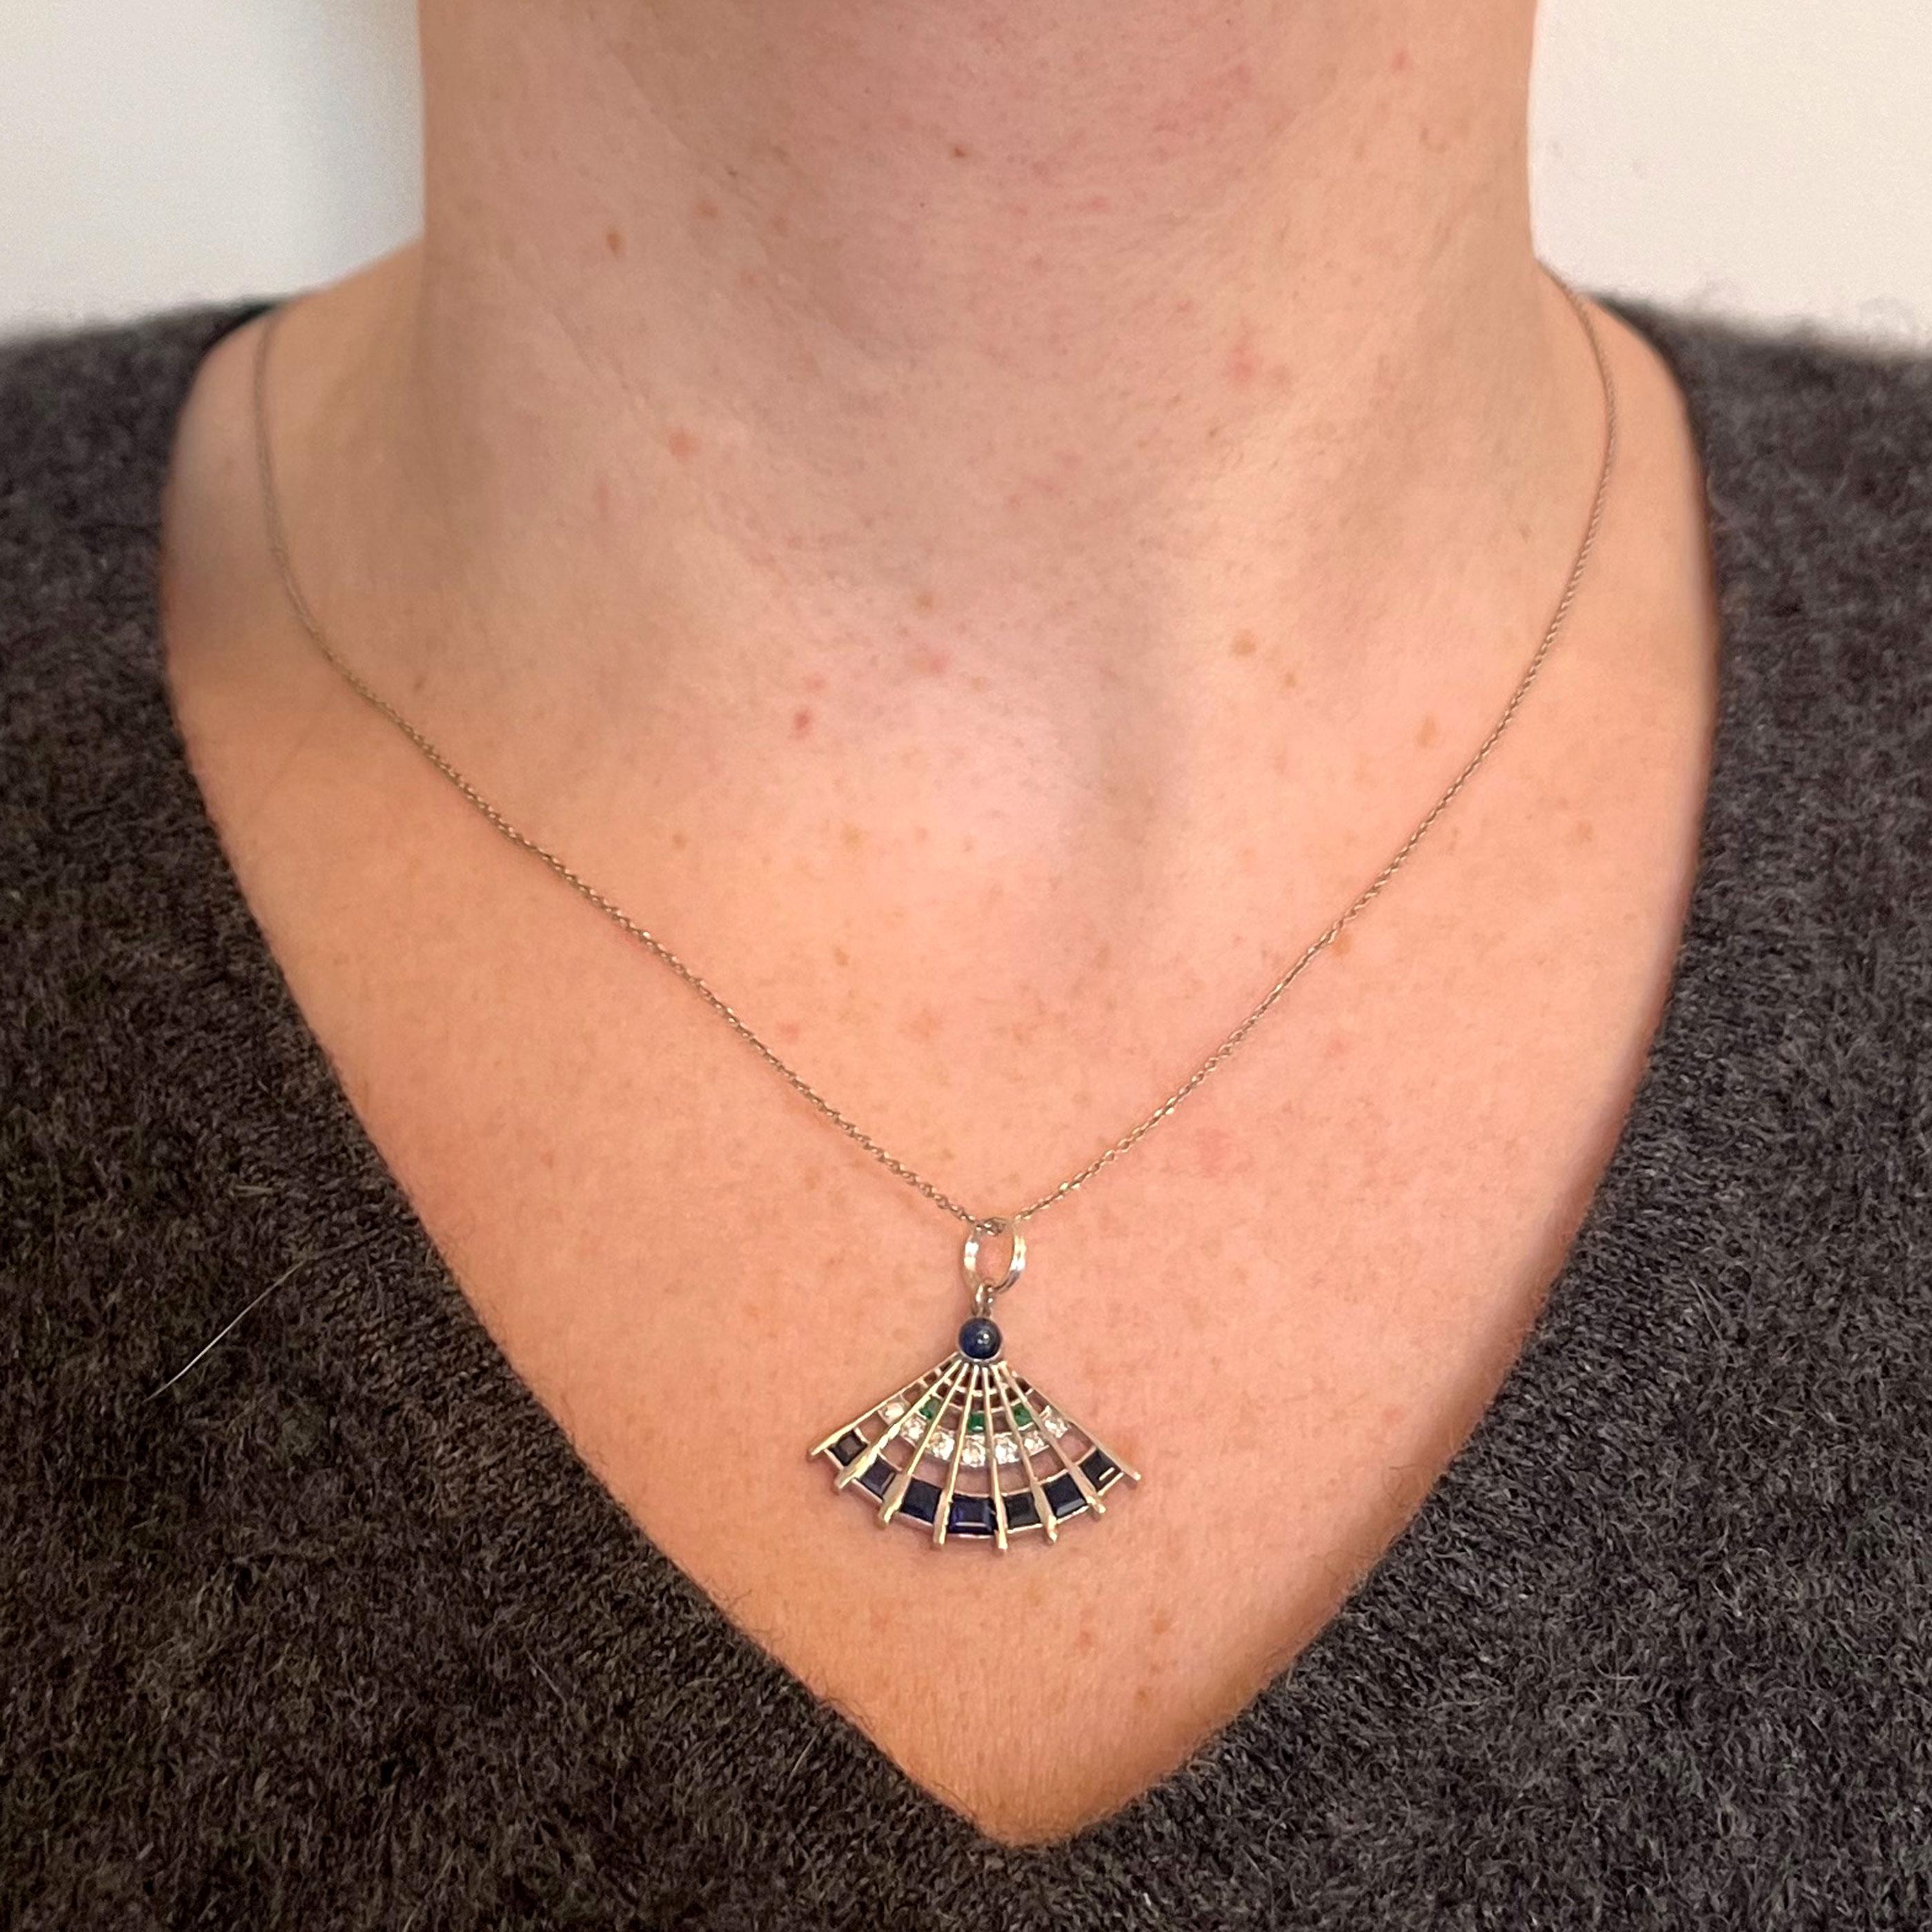 An Art Deco platinum charm pendant designed as a lady’s fan set with sapphires, emeralds and diamonds. Unmarked but tested for platinum.
Sapphire weight: 1.10 carats (estimated)
Diamond weight: 0.07 carats (estimated)
Emerald weight: 0.03 carats